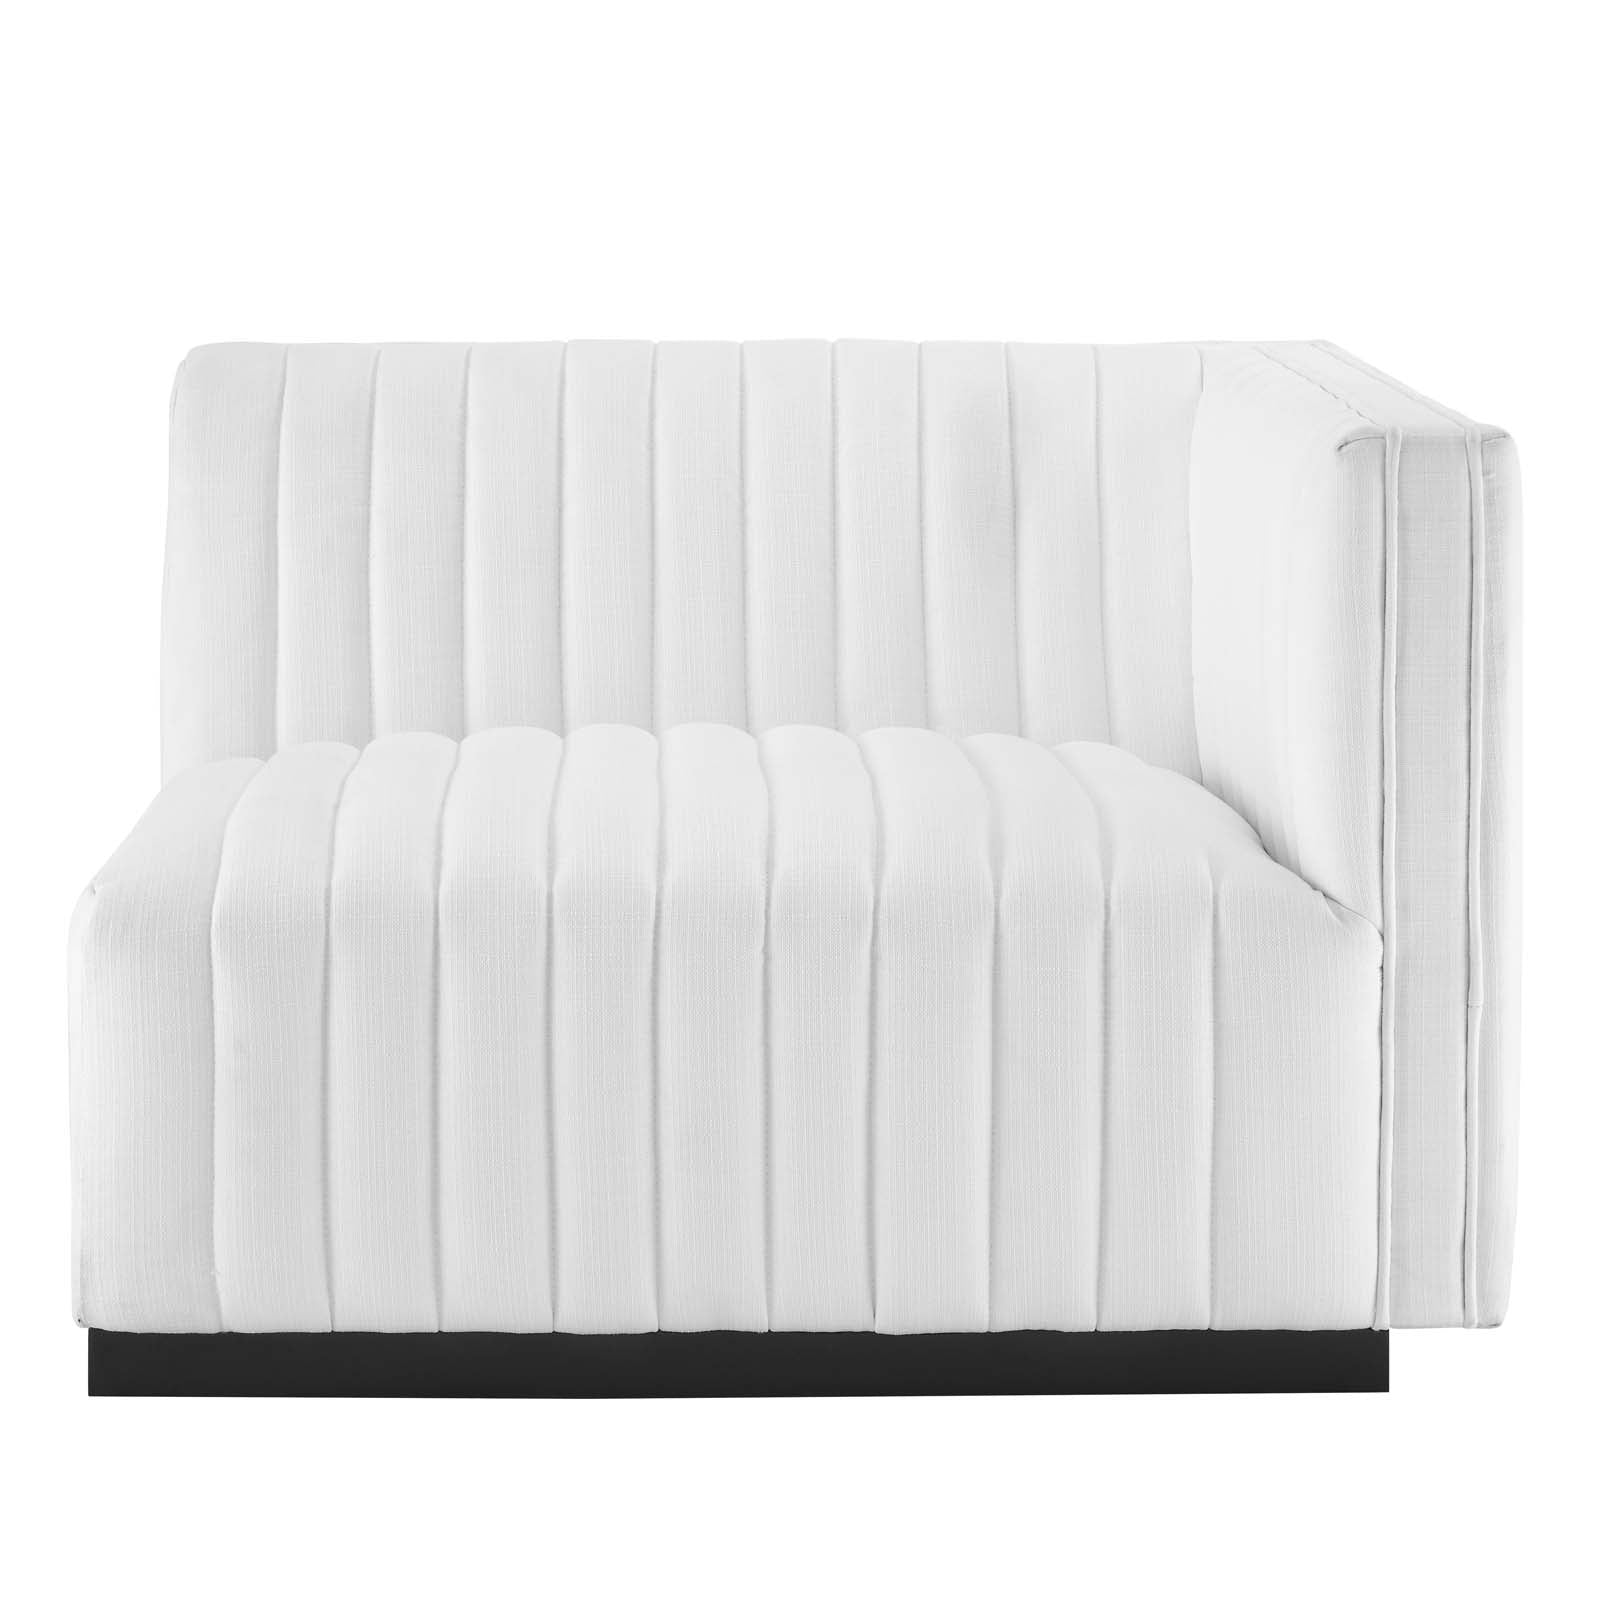 Modway Sectional Sofas - Conjure Channel Tufted Upholstered 73 " W Fabric 4-Piece L-Shaped Sectional Black White